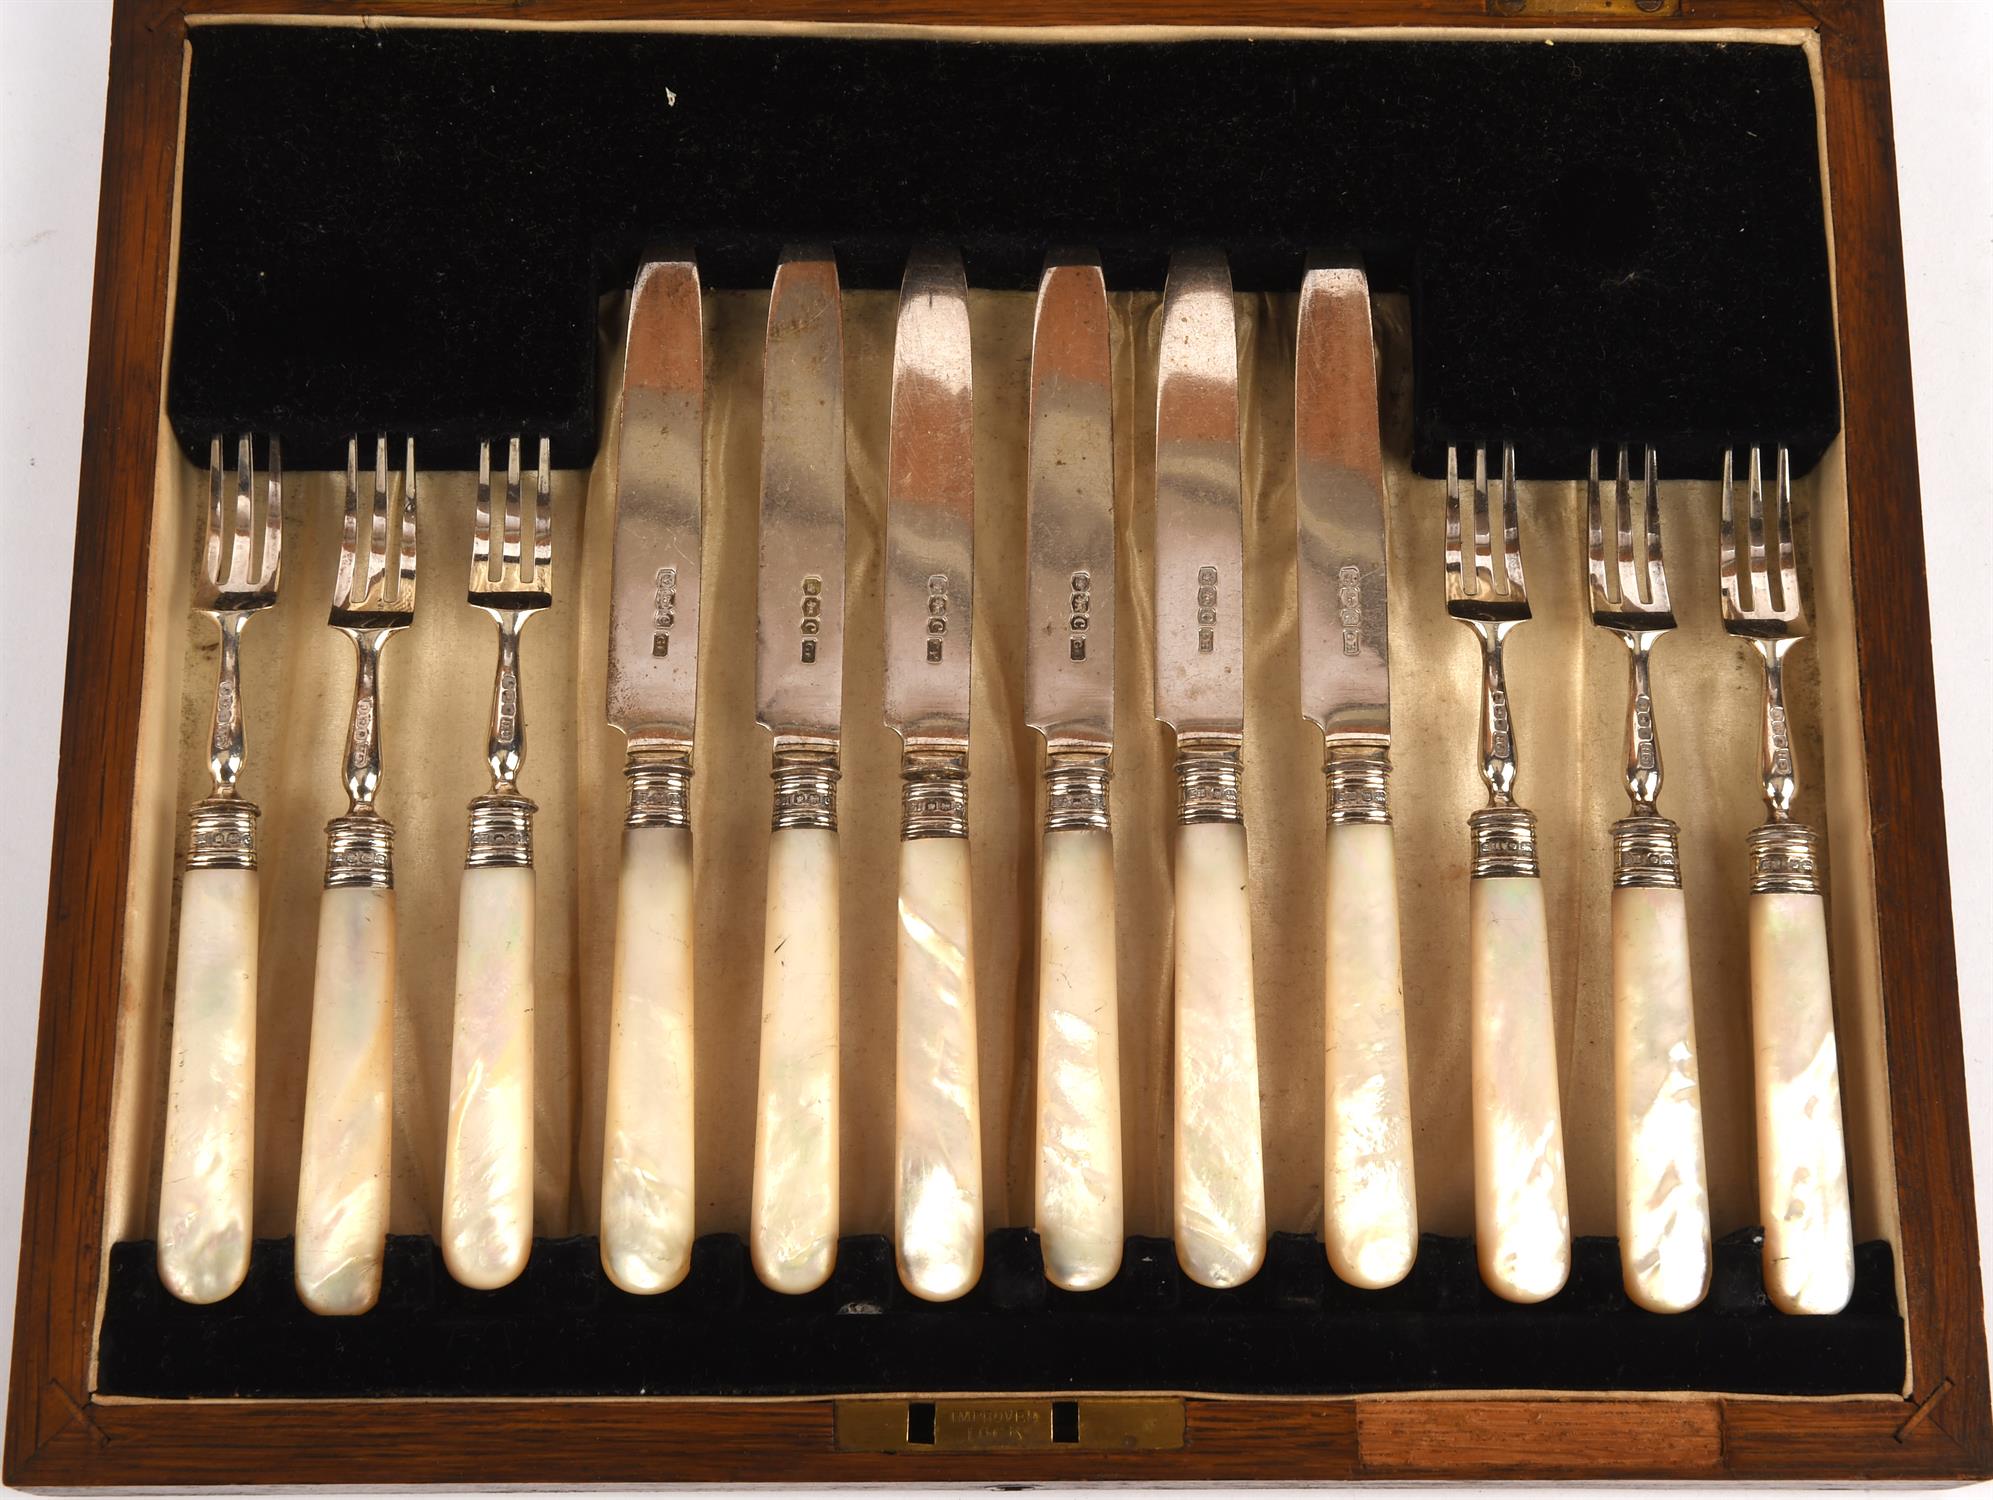 Cased silver fruit eating 12 piece set consisting of 6 forks, 6 knives with mother of pearls